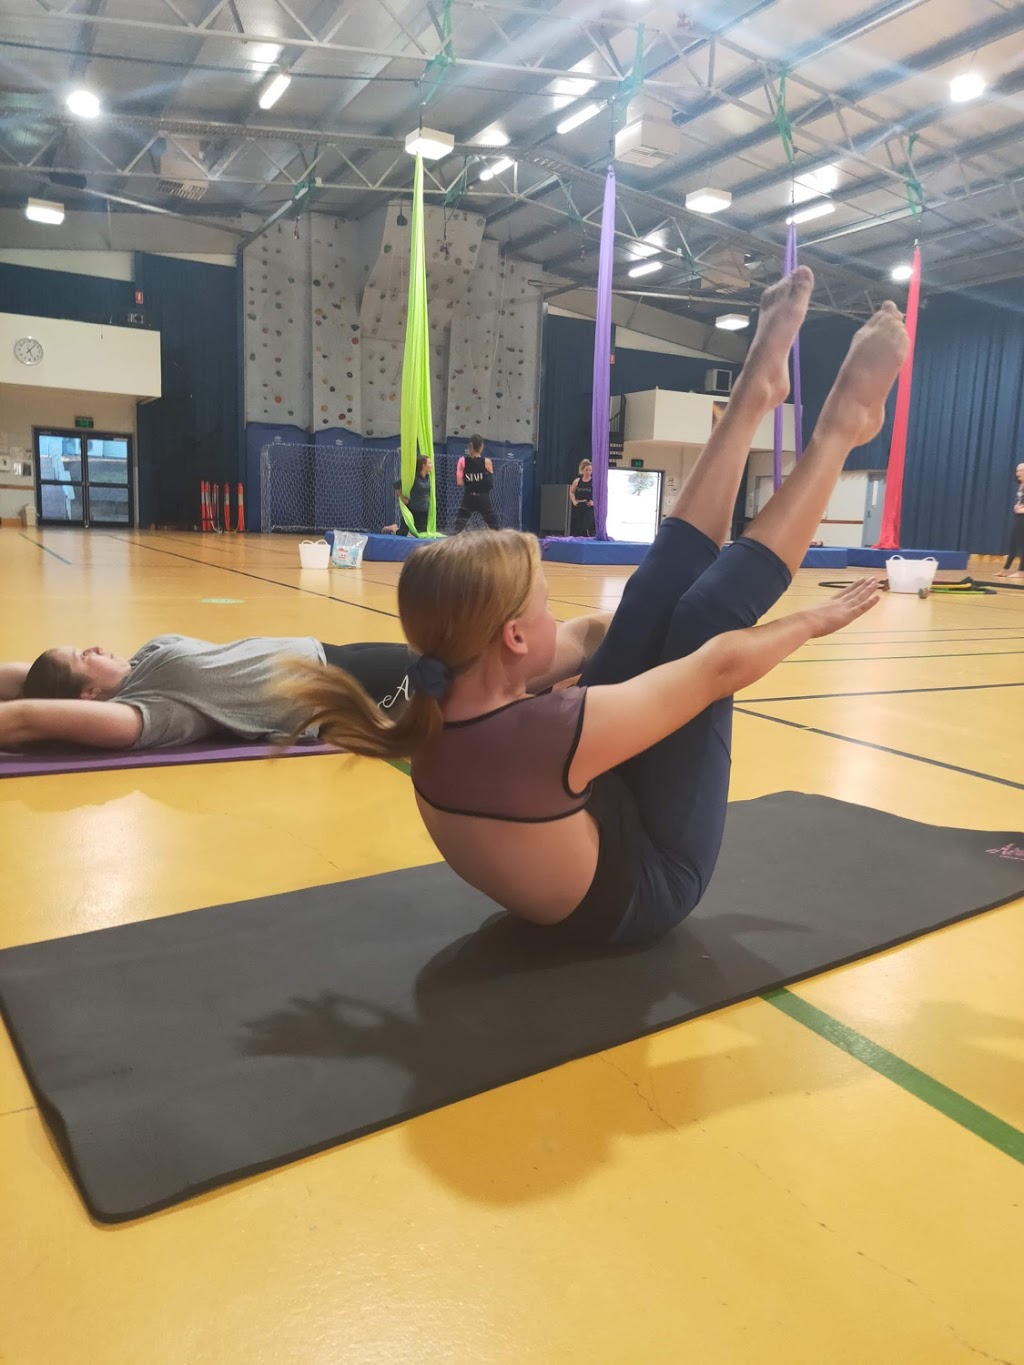 Aerial Dreaming - Event Entertainment & Aerial School |  | Stan Baker Hall (Cooloola Christian College, 1 College Rd, Gympie QLD 4570, Australia | 0410568829 OR +61 410 568 829